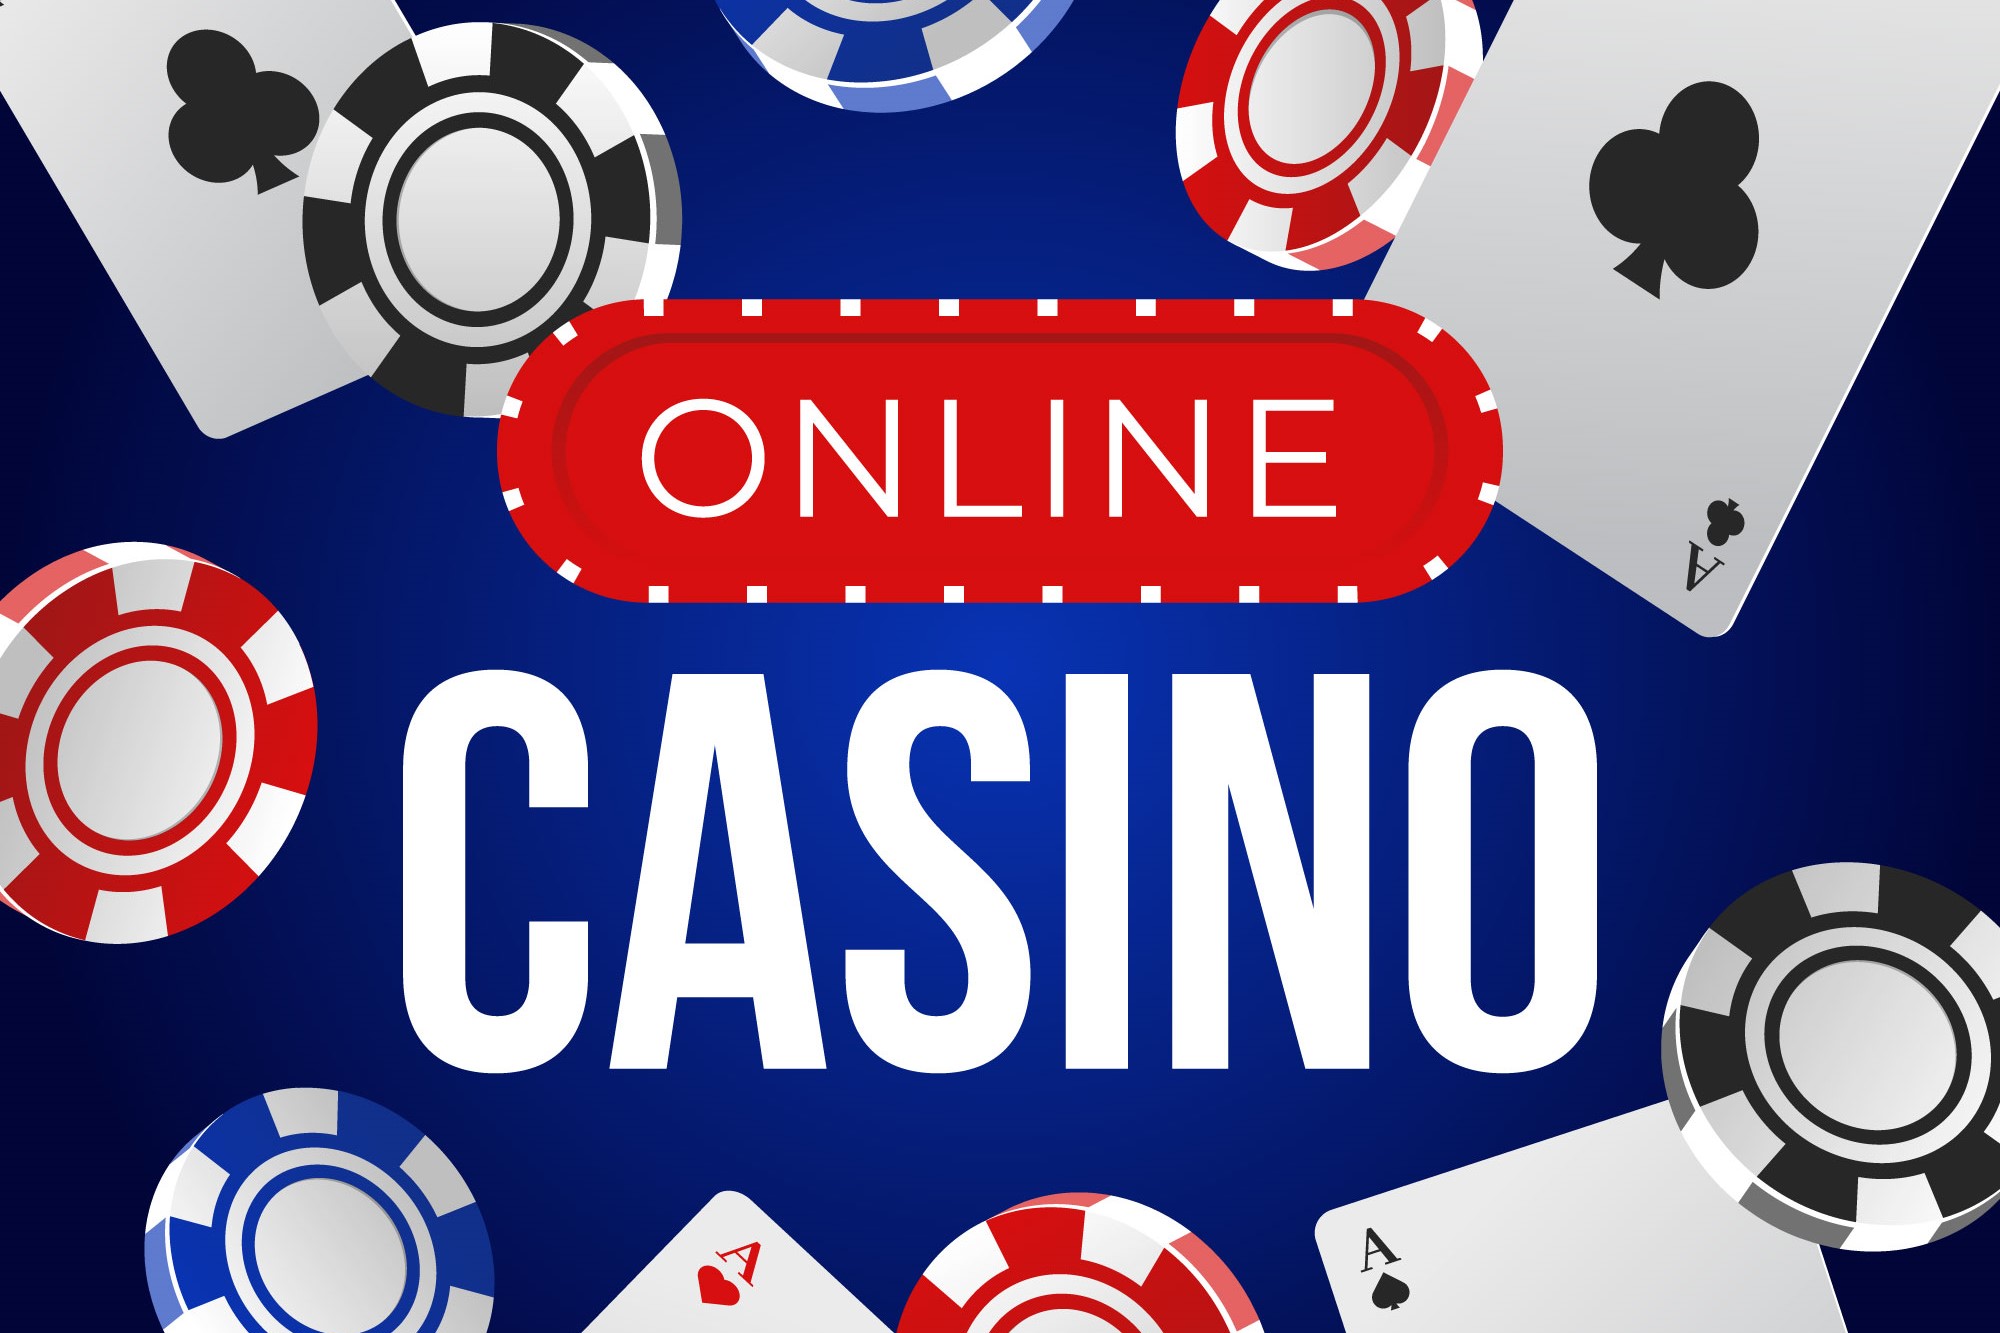 How to Use Dash in Online Casinos